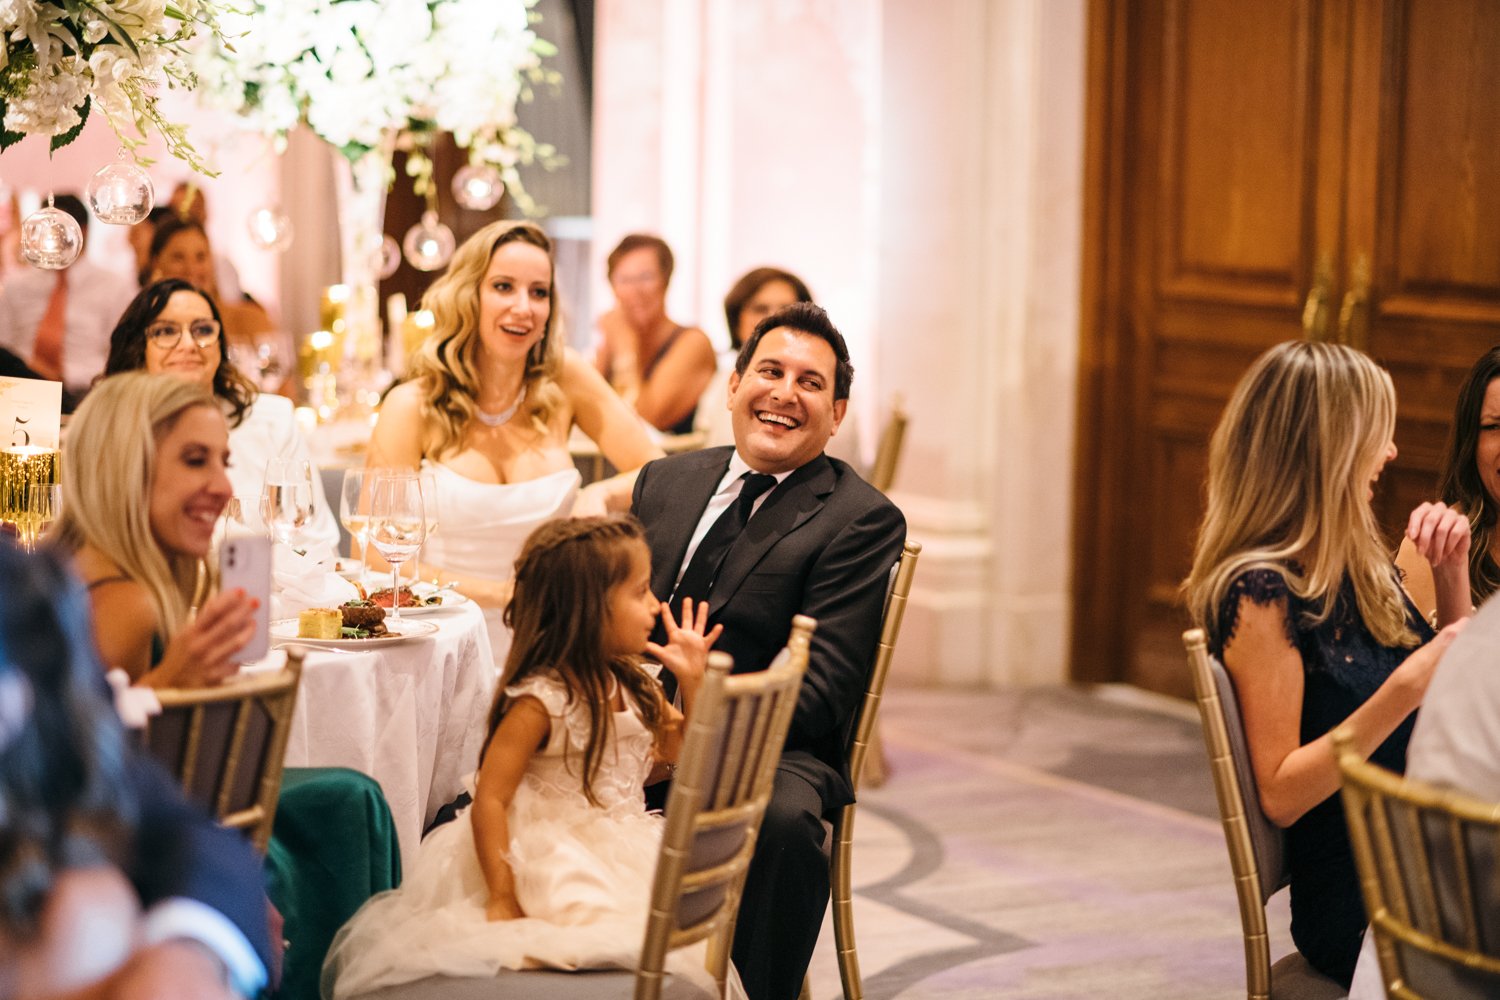 Bride and groom are seated beside their wedding guests and smile and laugh.

Manhattan Luxury Wedding. New York Luxury Wedding Photographer. Wedding in Manhattan. NYC Luxury Wedding.